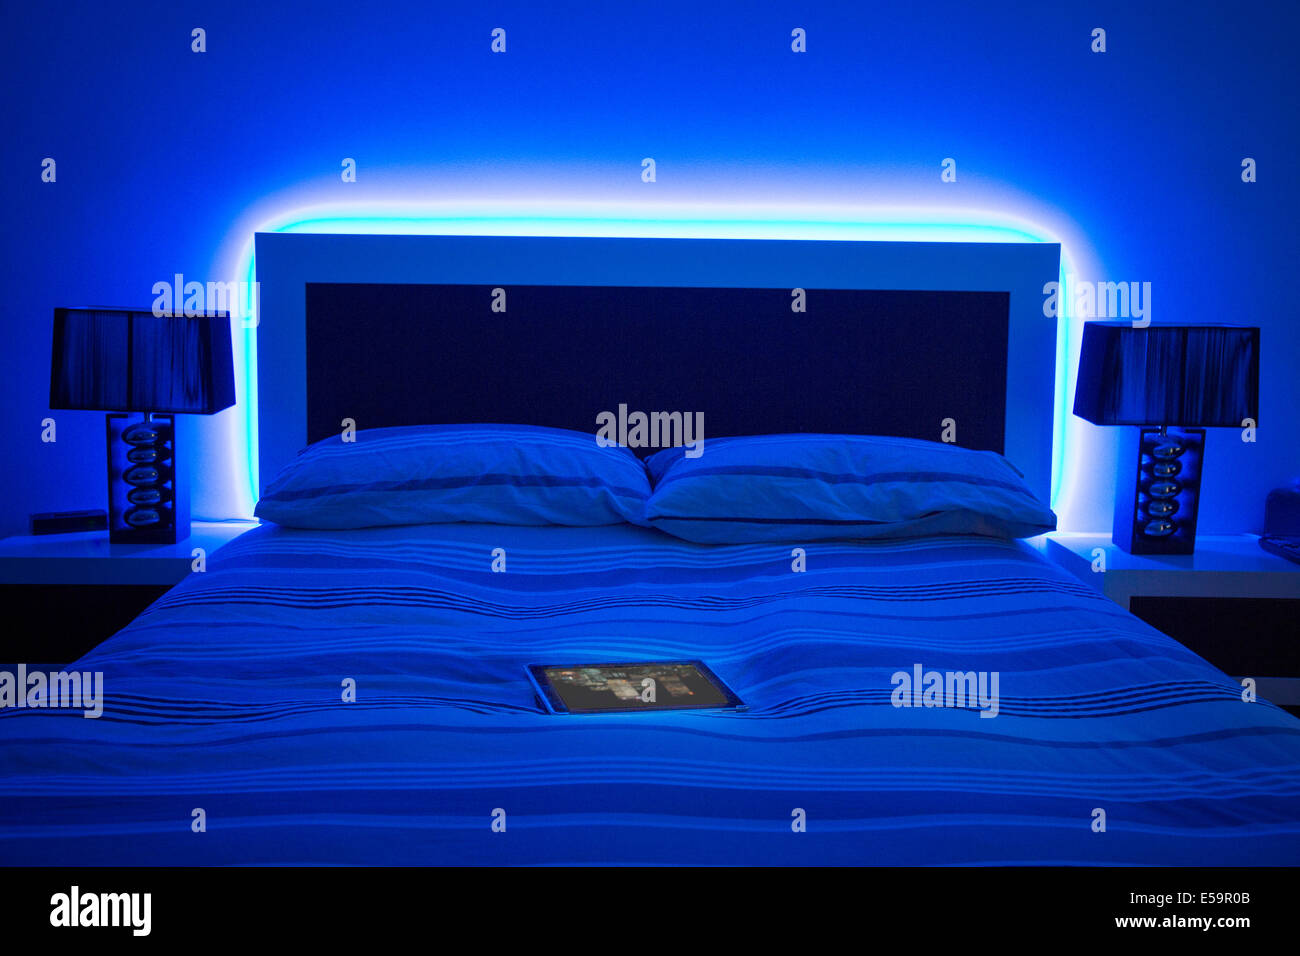 digital tablet on glowing bed Stock Photo